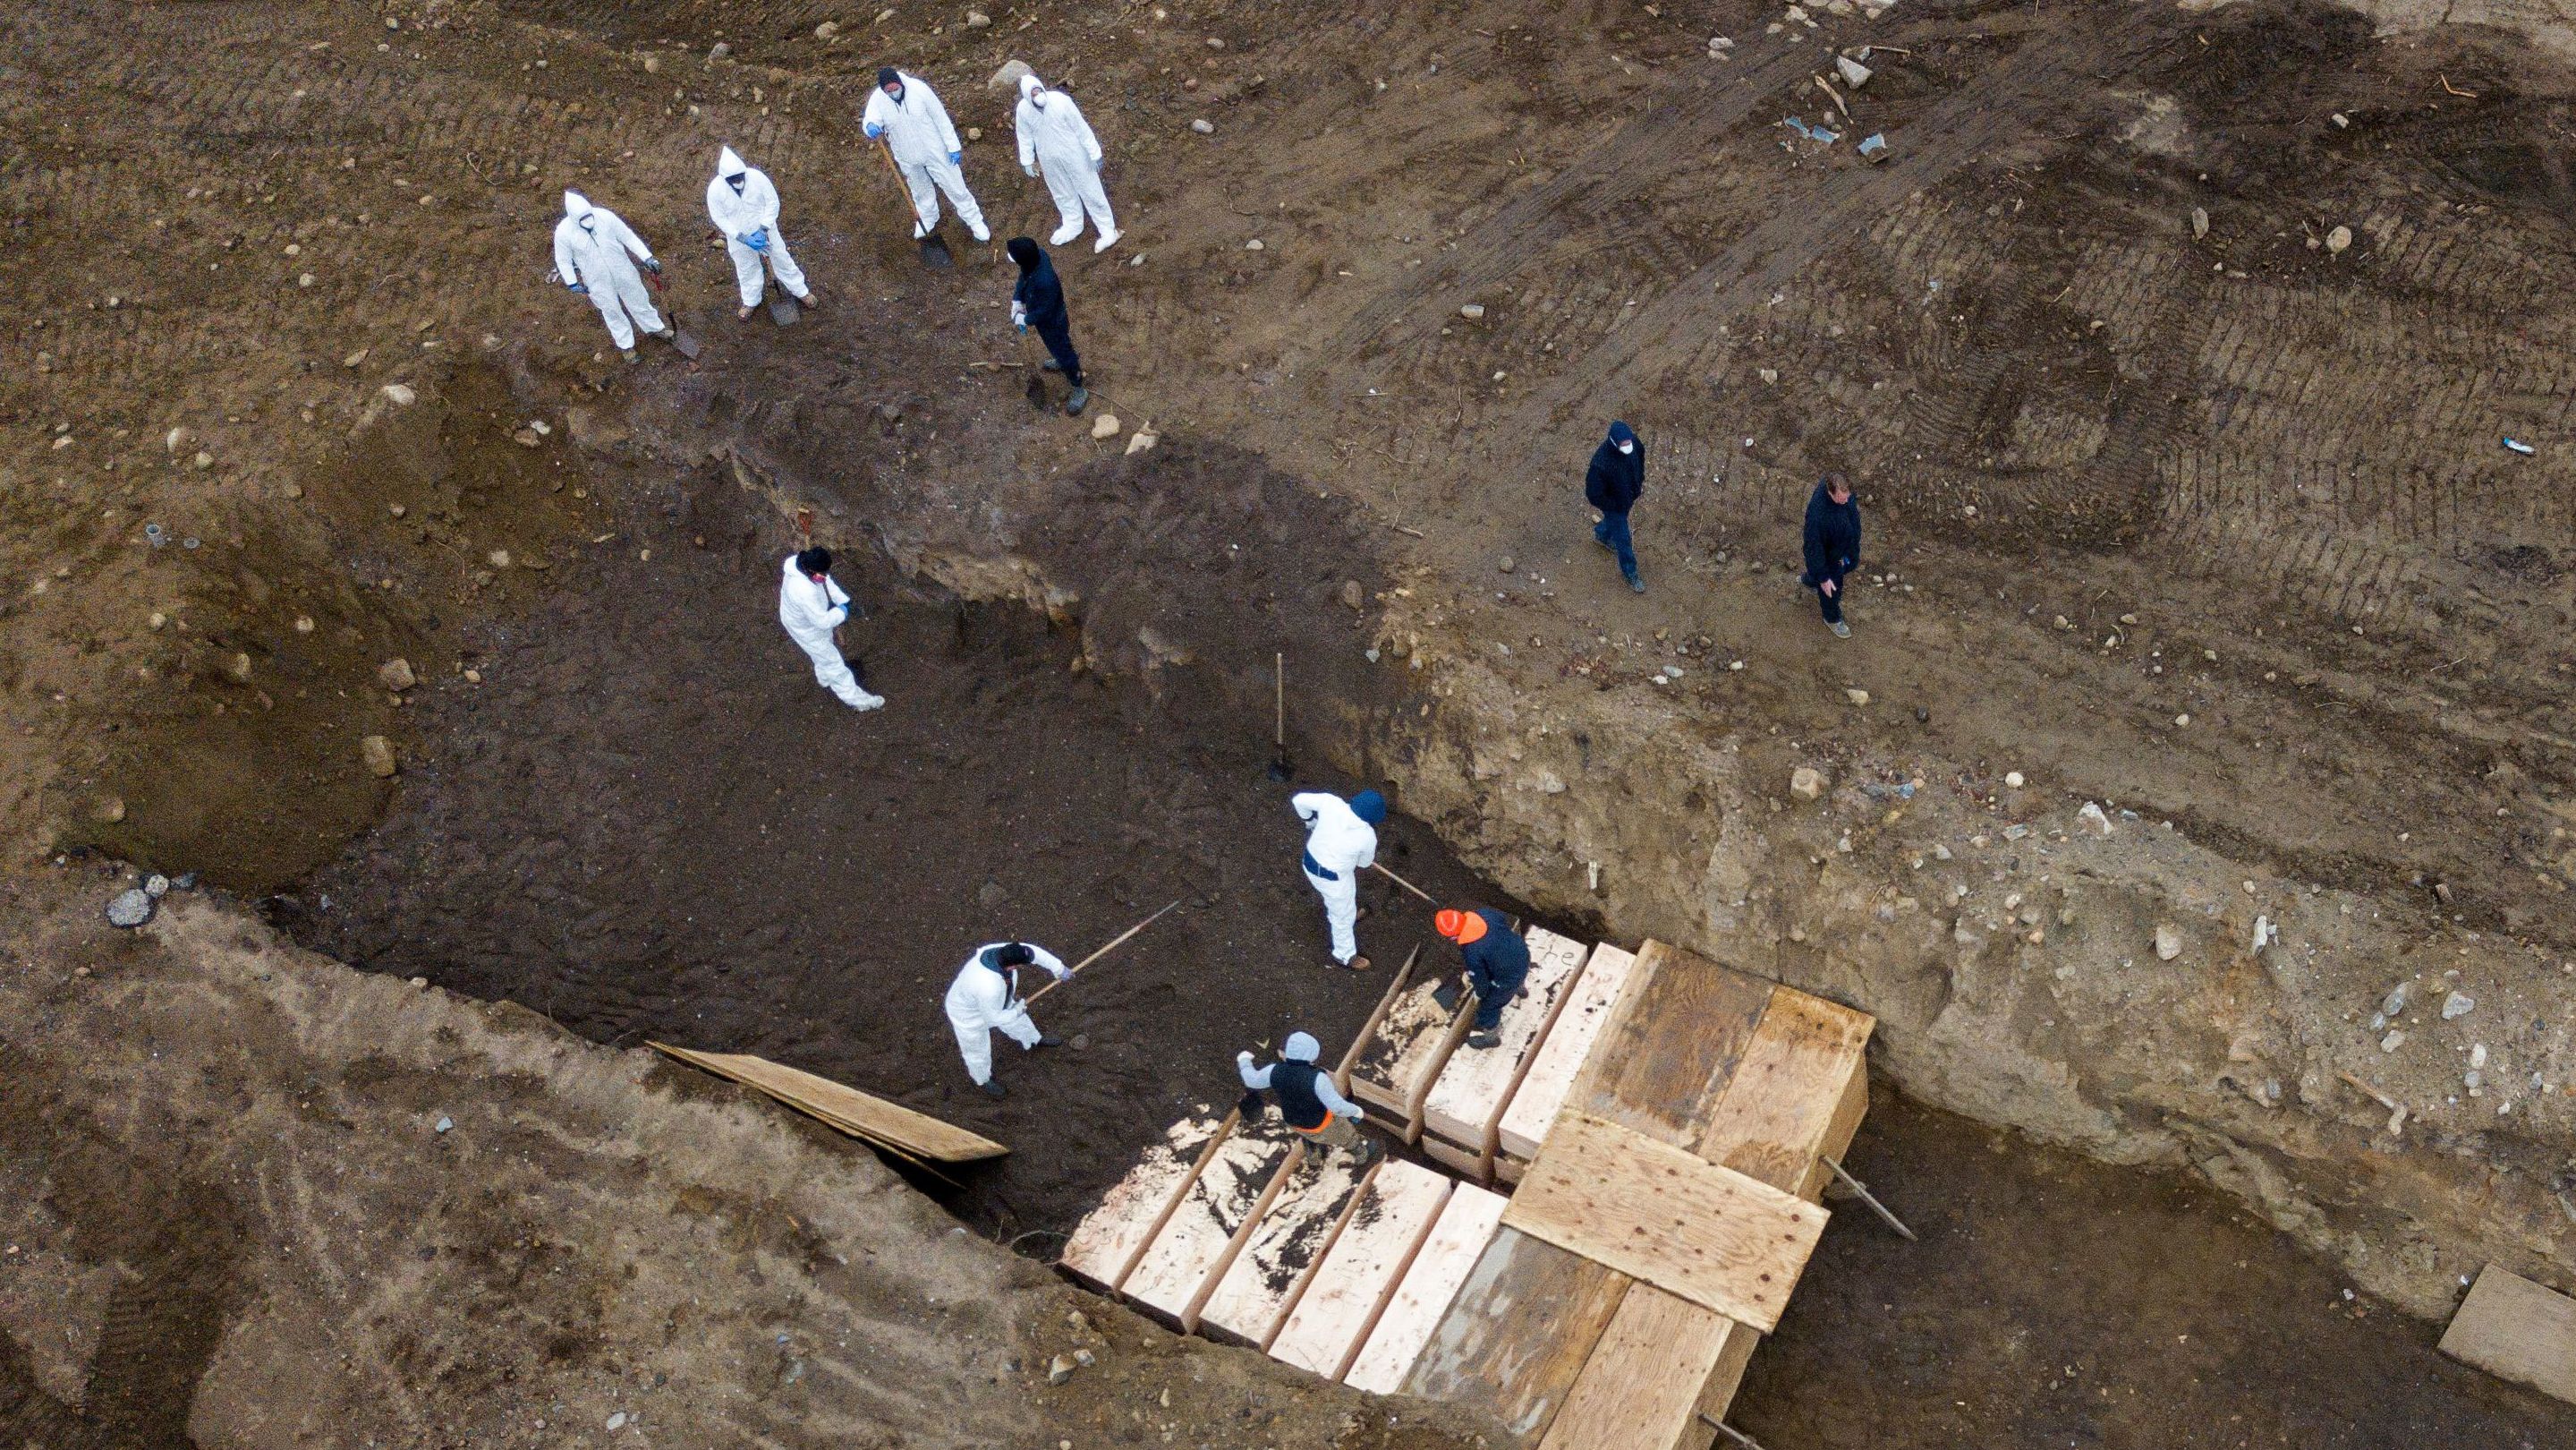 Drone pictures show bodies being buried on New York's Hart Island.